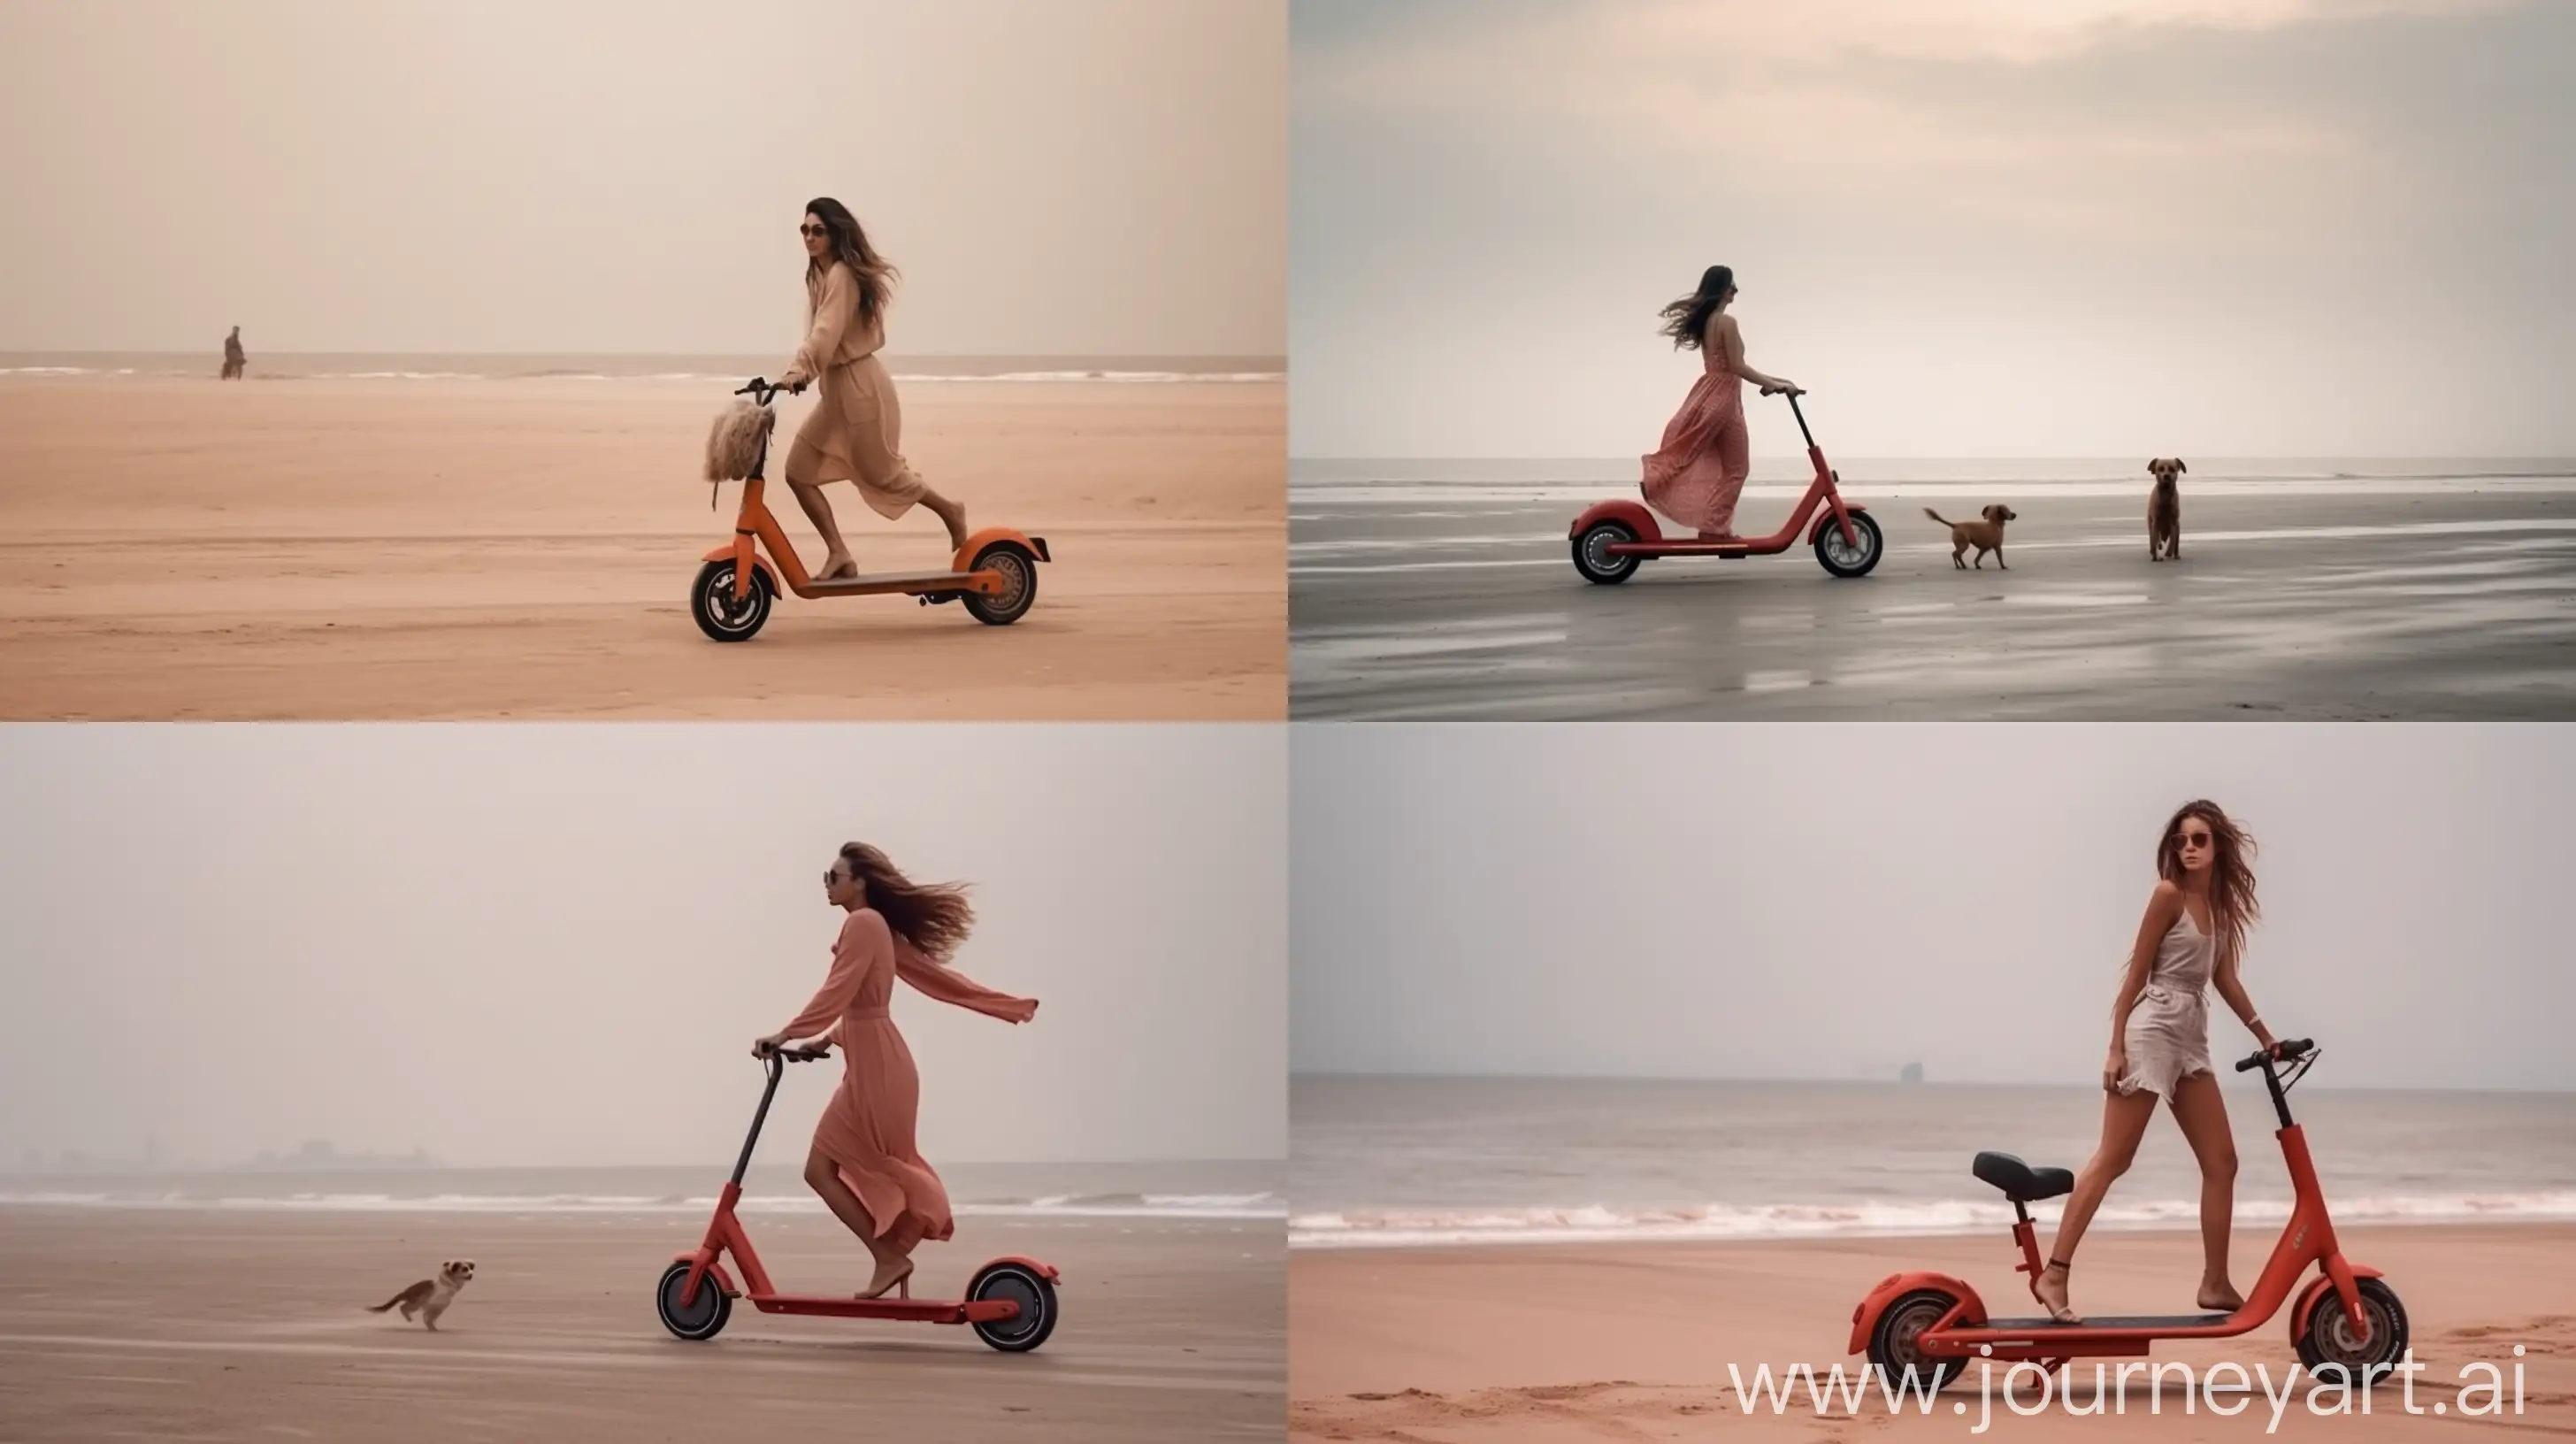 Beach-Road-Scene-Dog-Running-Near-Woman-on-Electric-Scooter